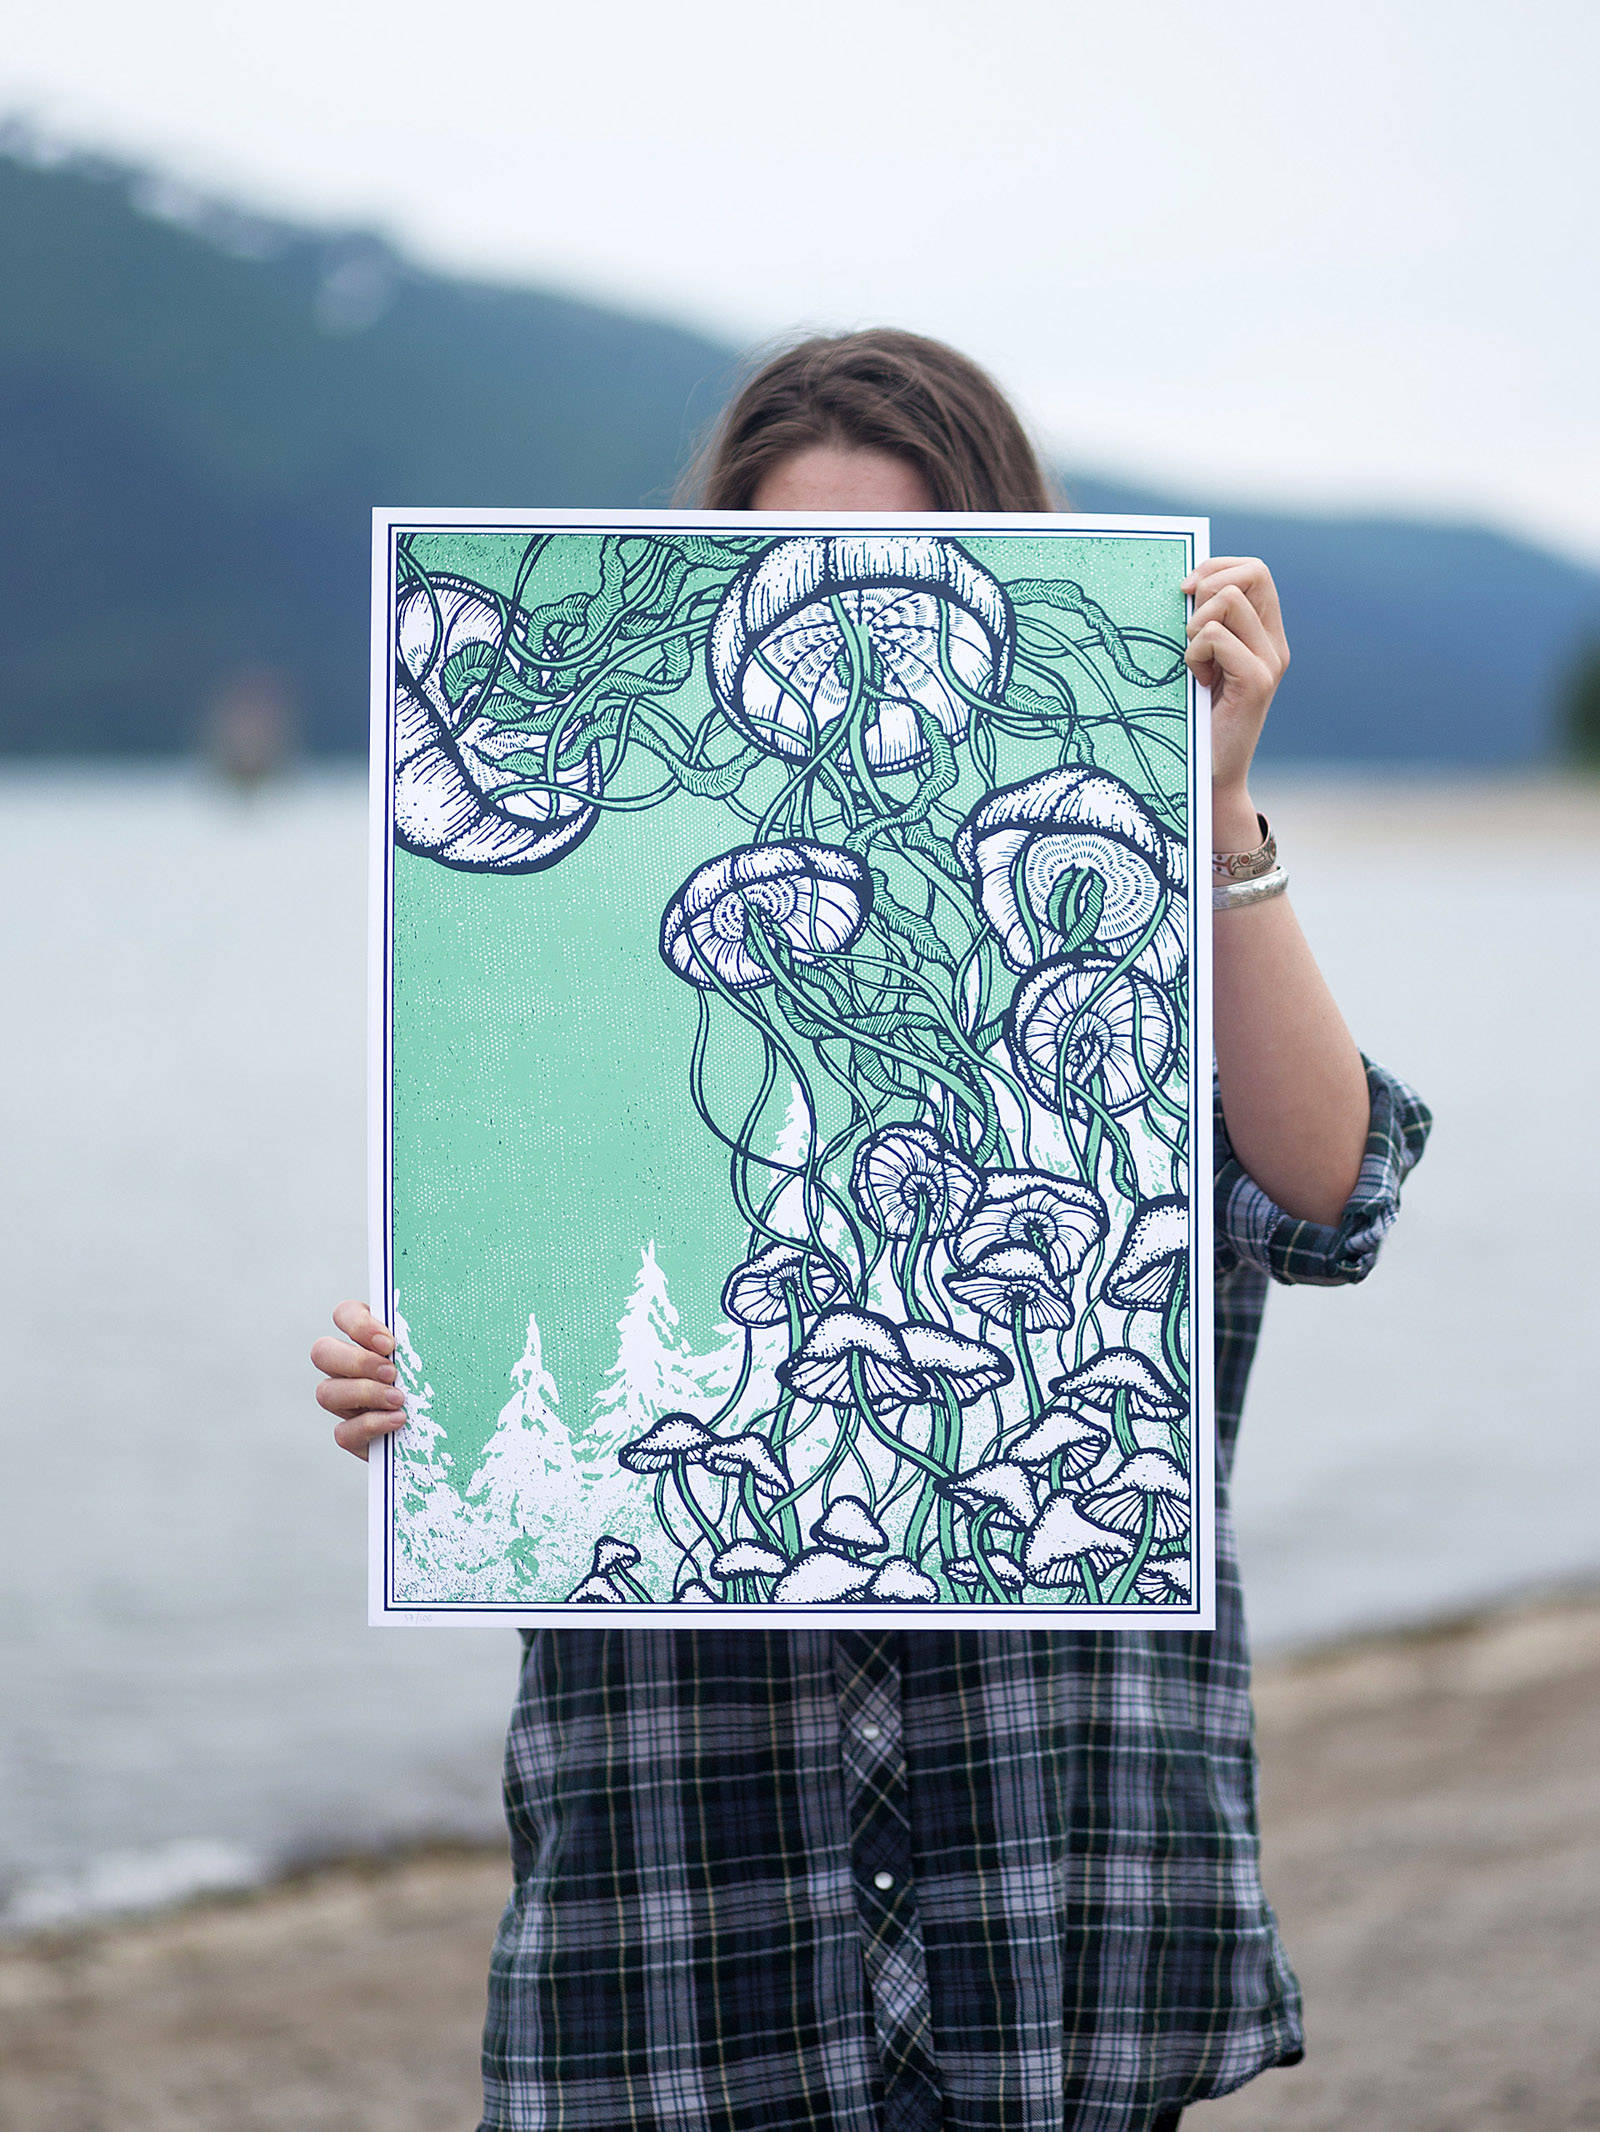 Michaela Goade holds up one of her art pieces at Sandy Beach. Courtesy image.